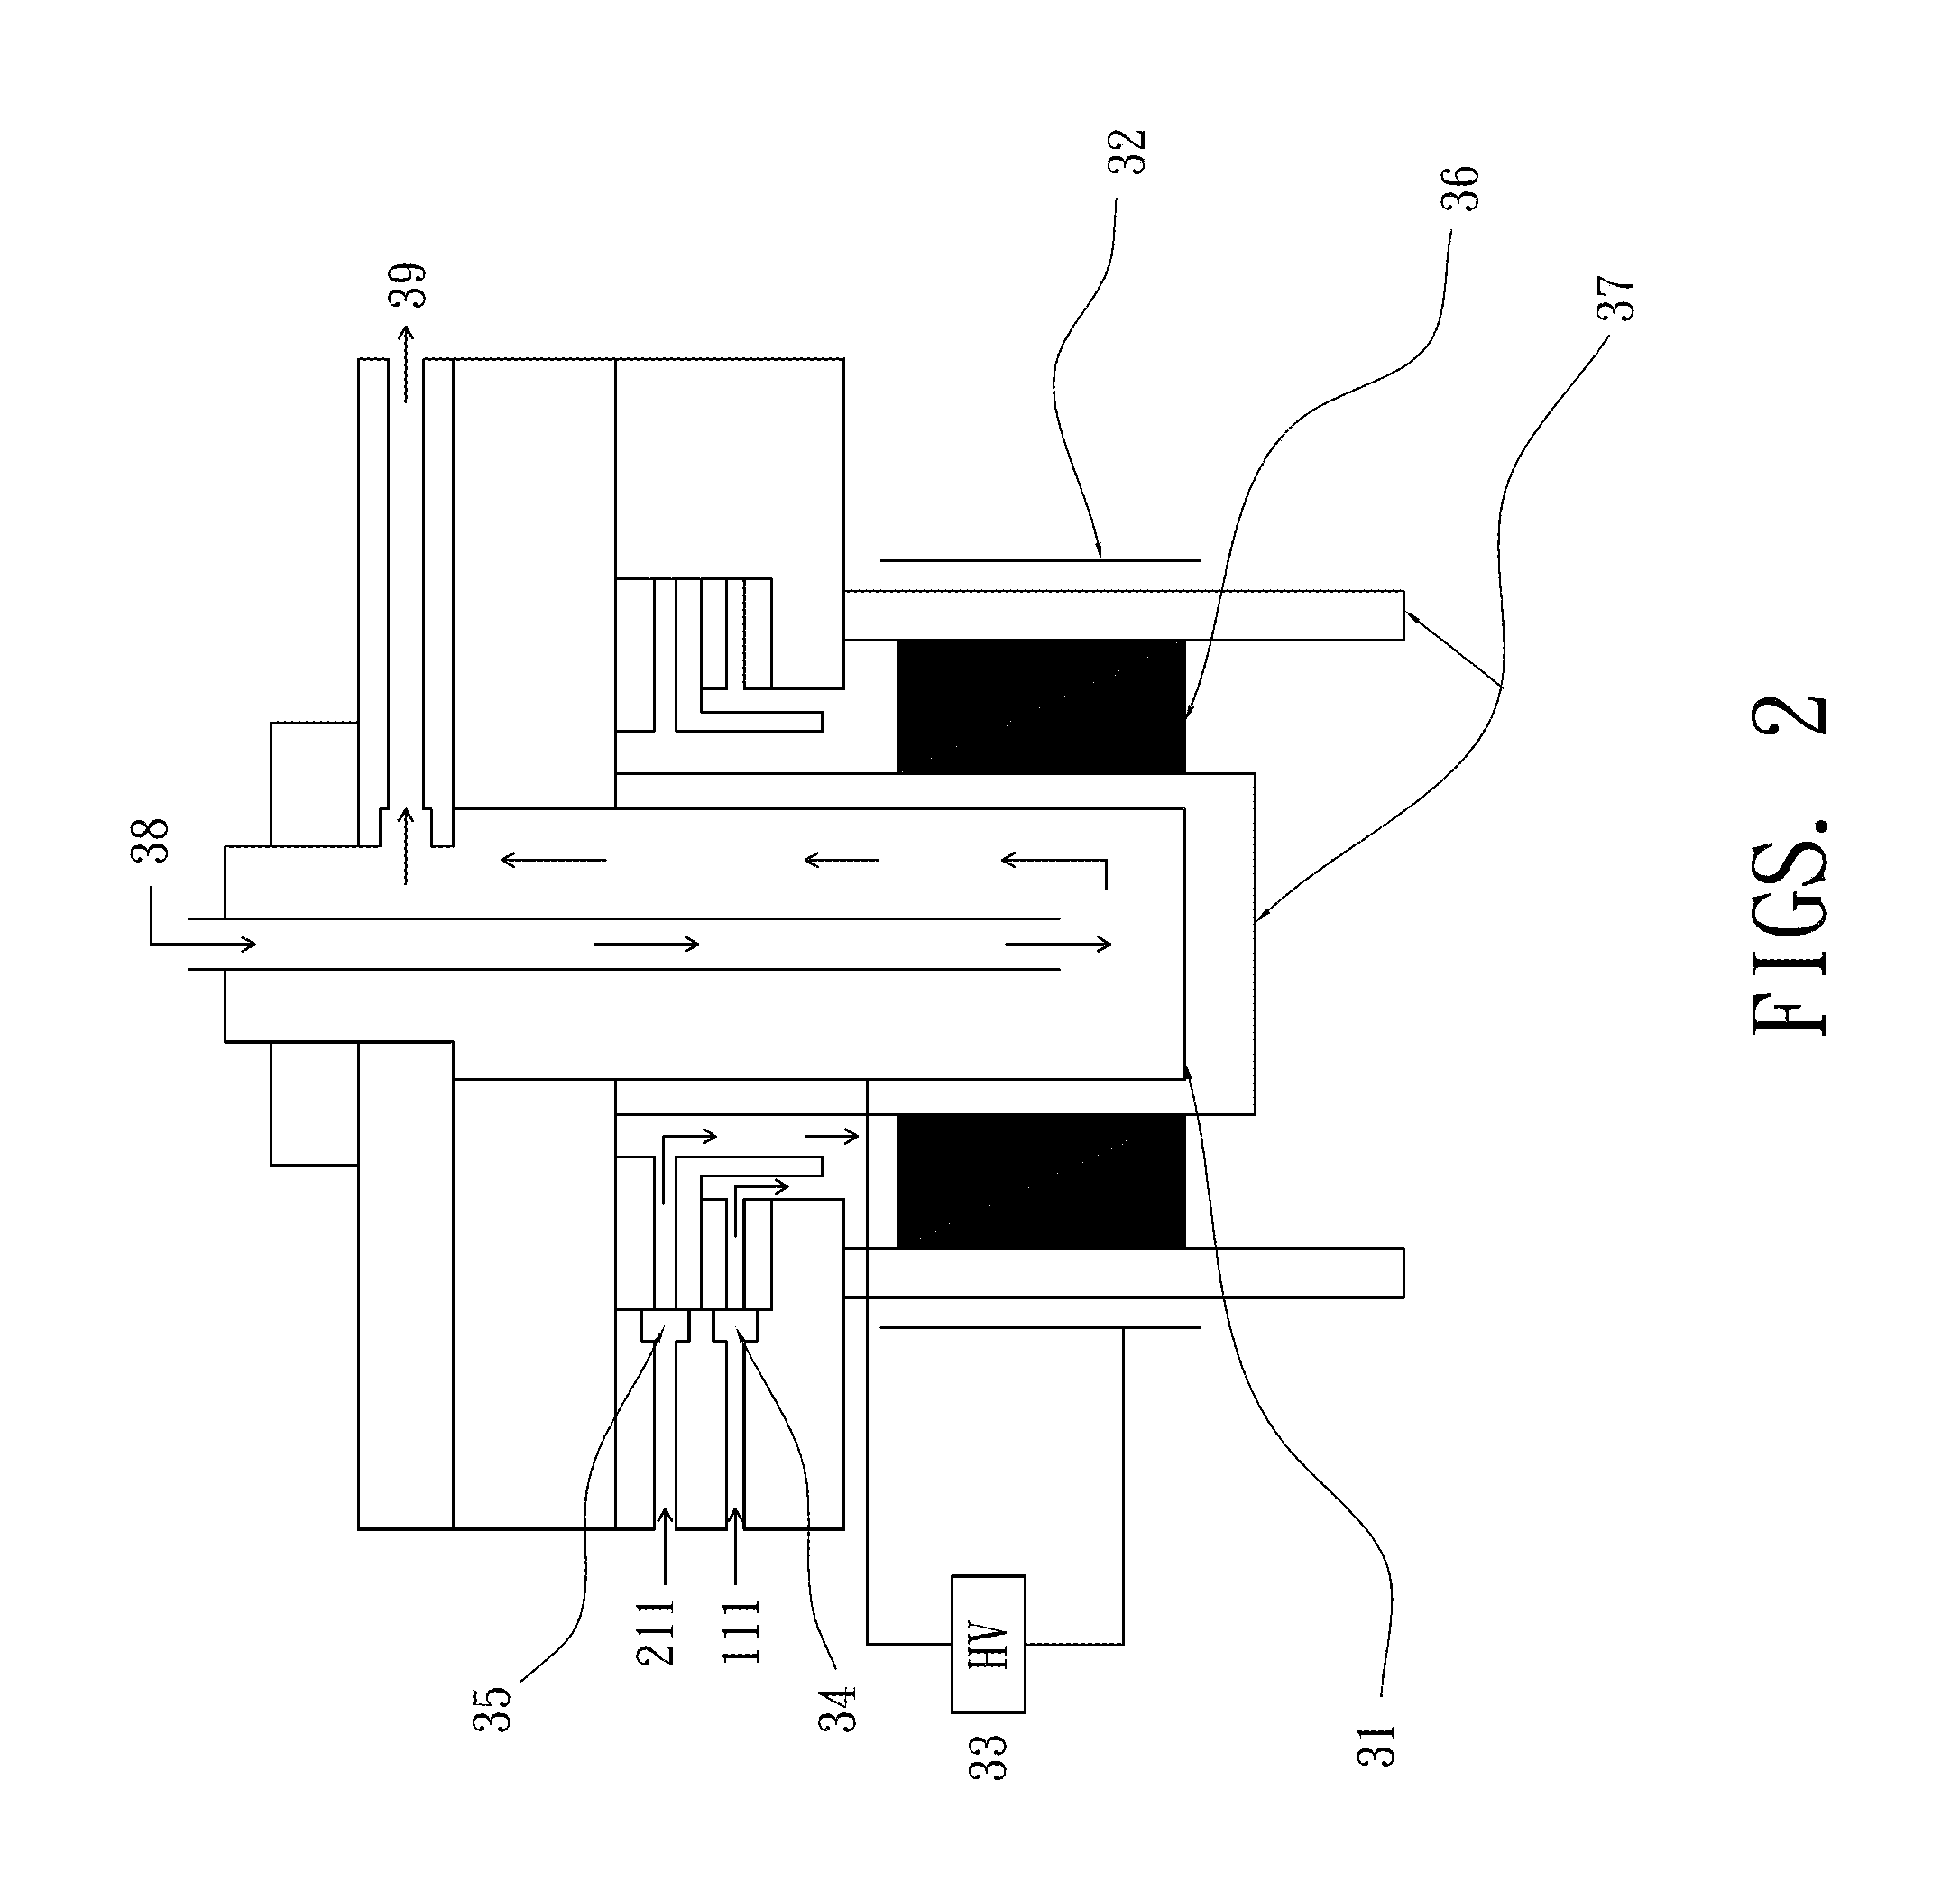 Normal-Pressure Plasma-Based Apparatus for Processing Waste Water by Mixing the Waste Water with Working Gas